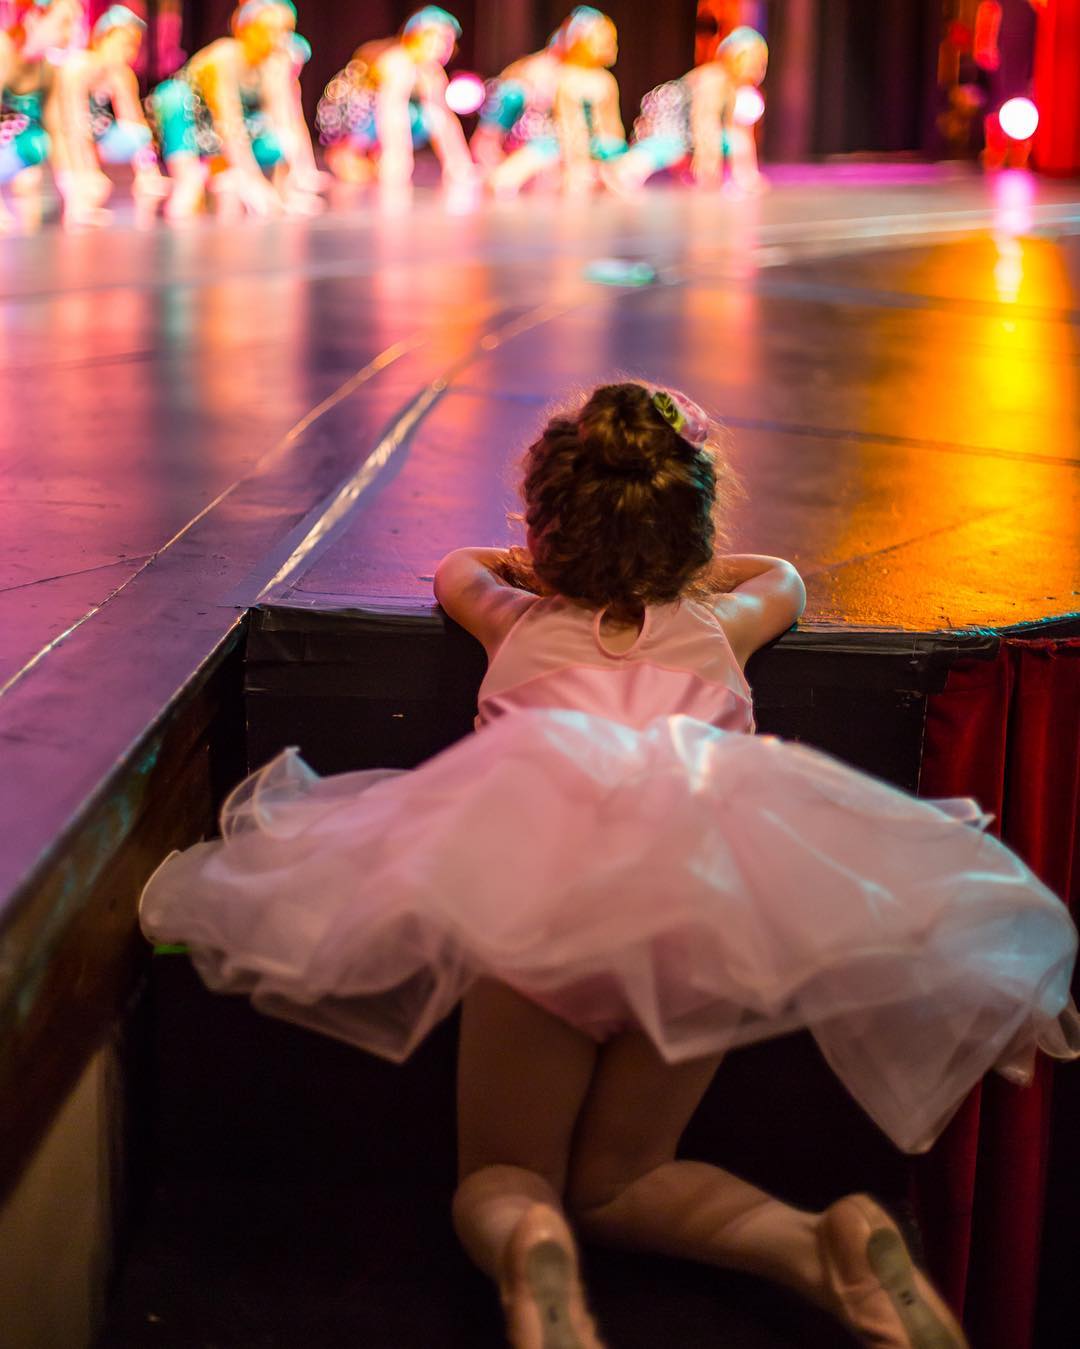 Love this of Rosebud during tonight's rehearsal...love seeing her watch and dream! #canon #5dmarkiii